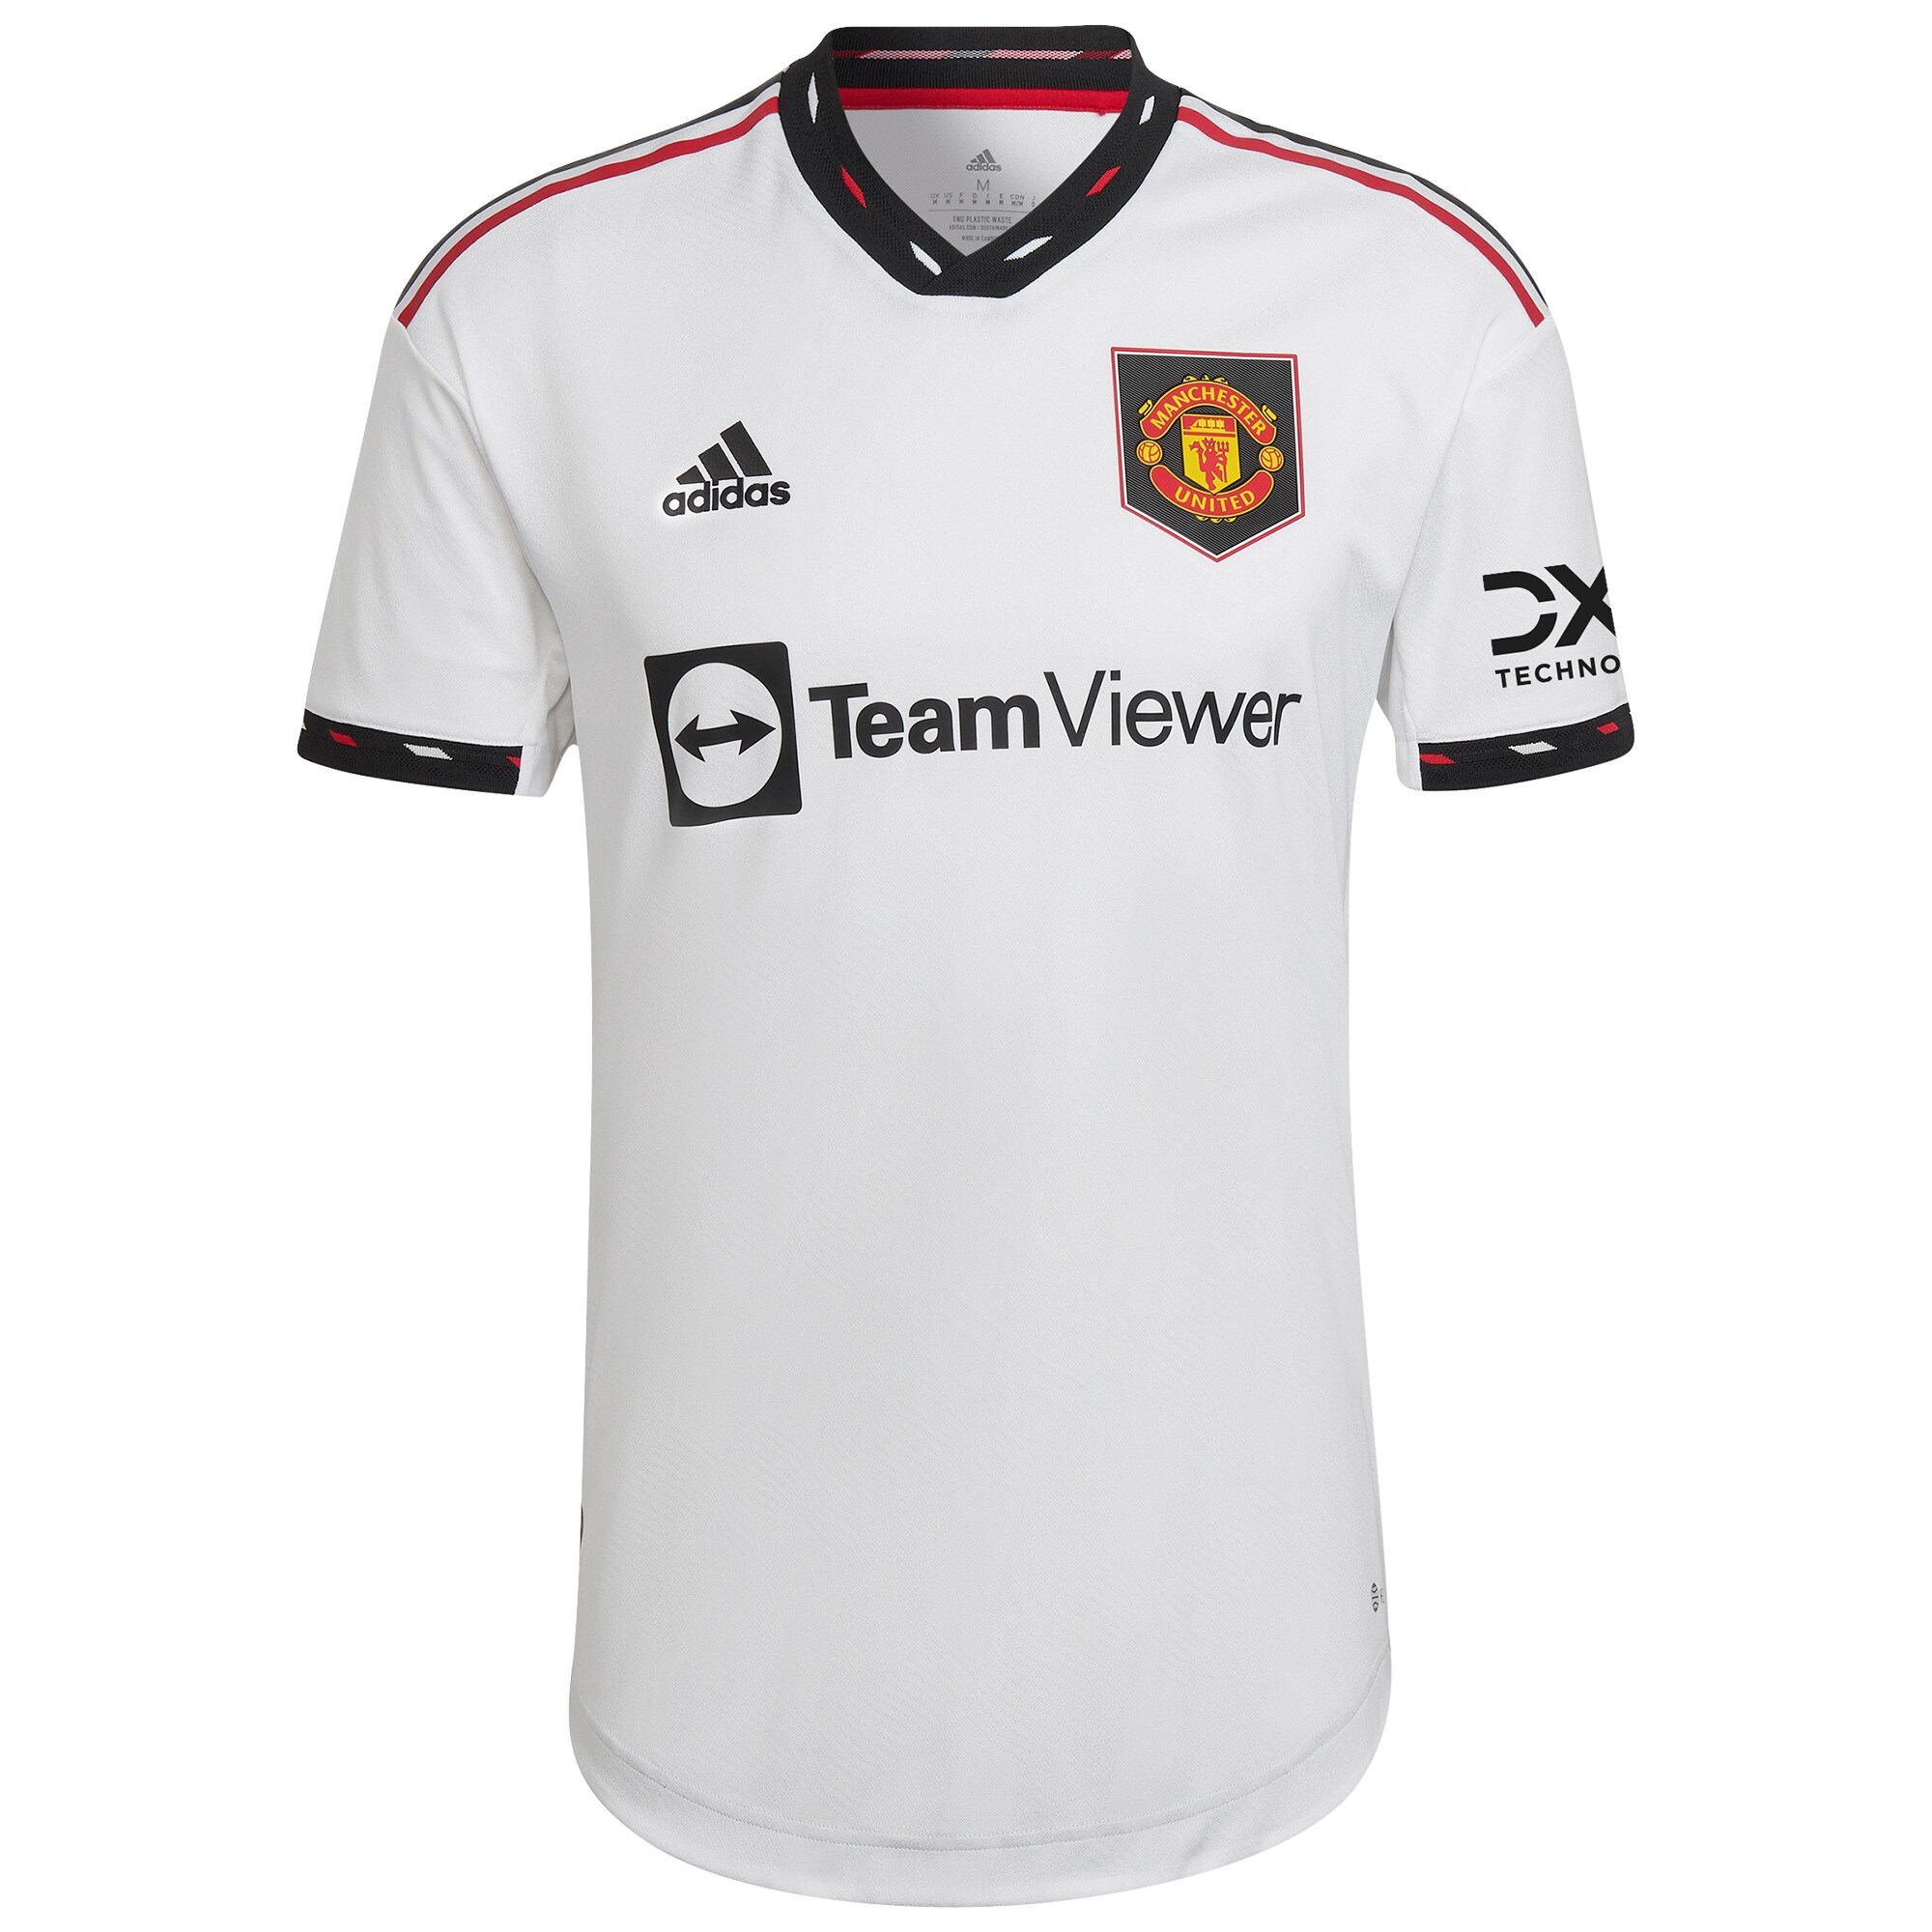 Manchester United Cup Away Authentic Shirt 2022-23 with Malacia 12 printing